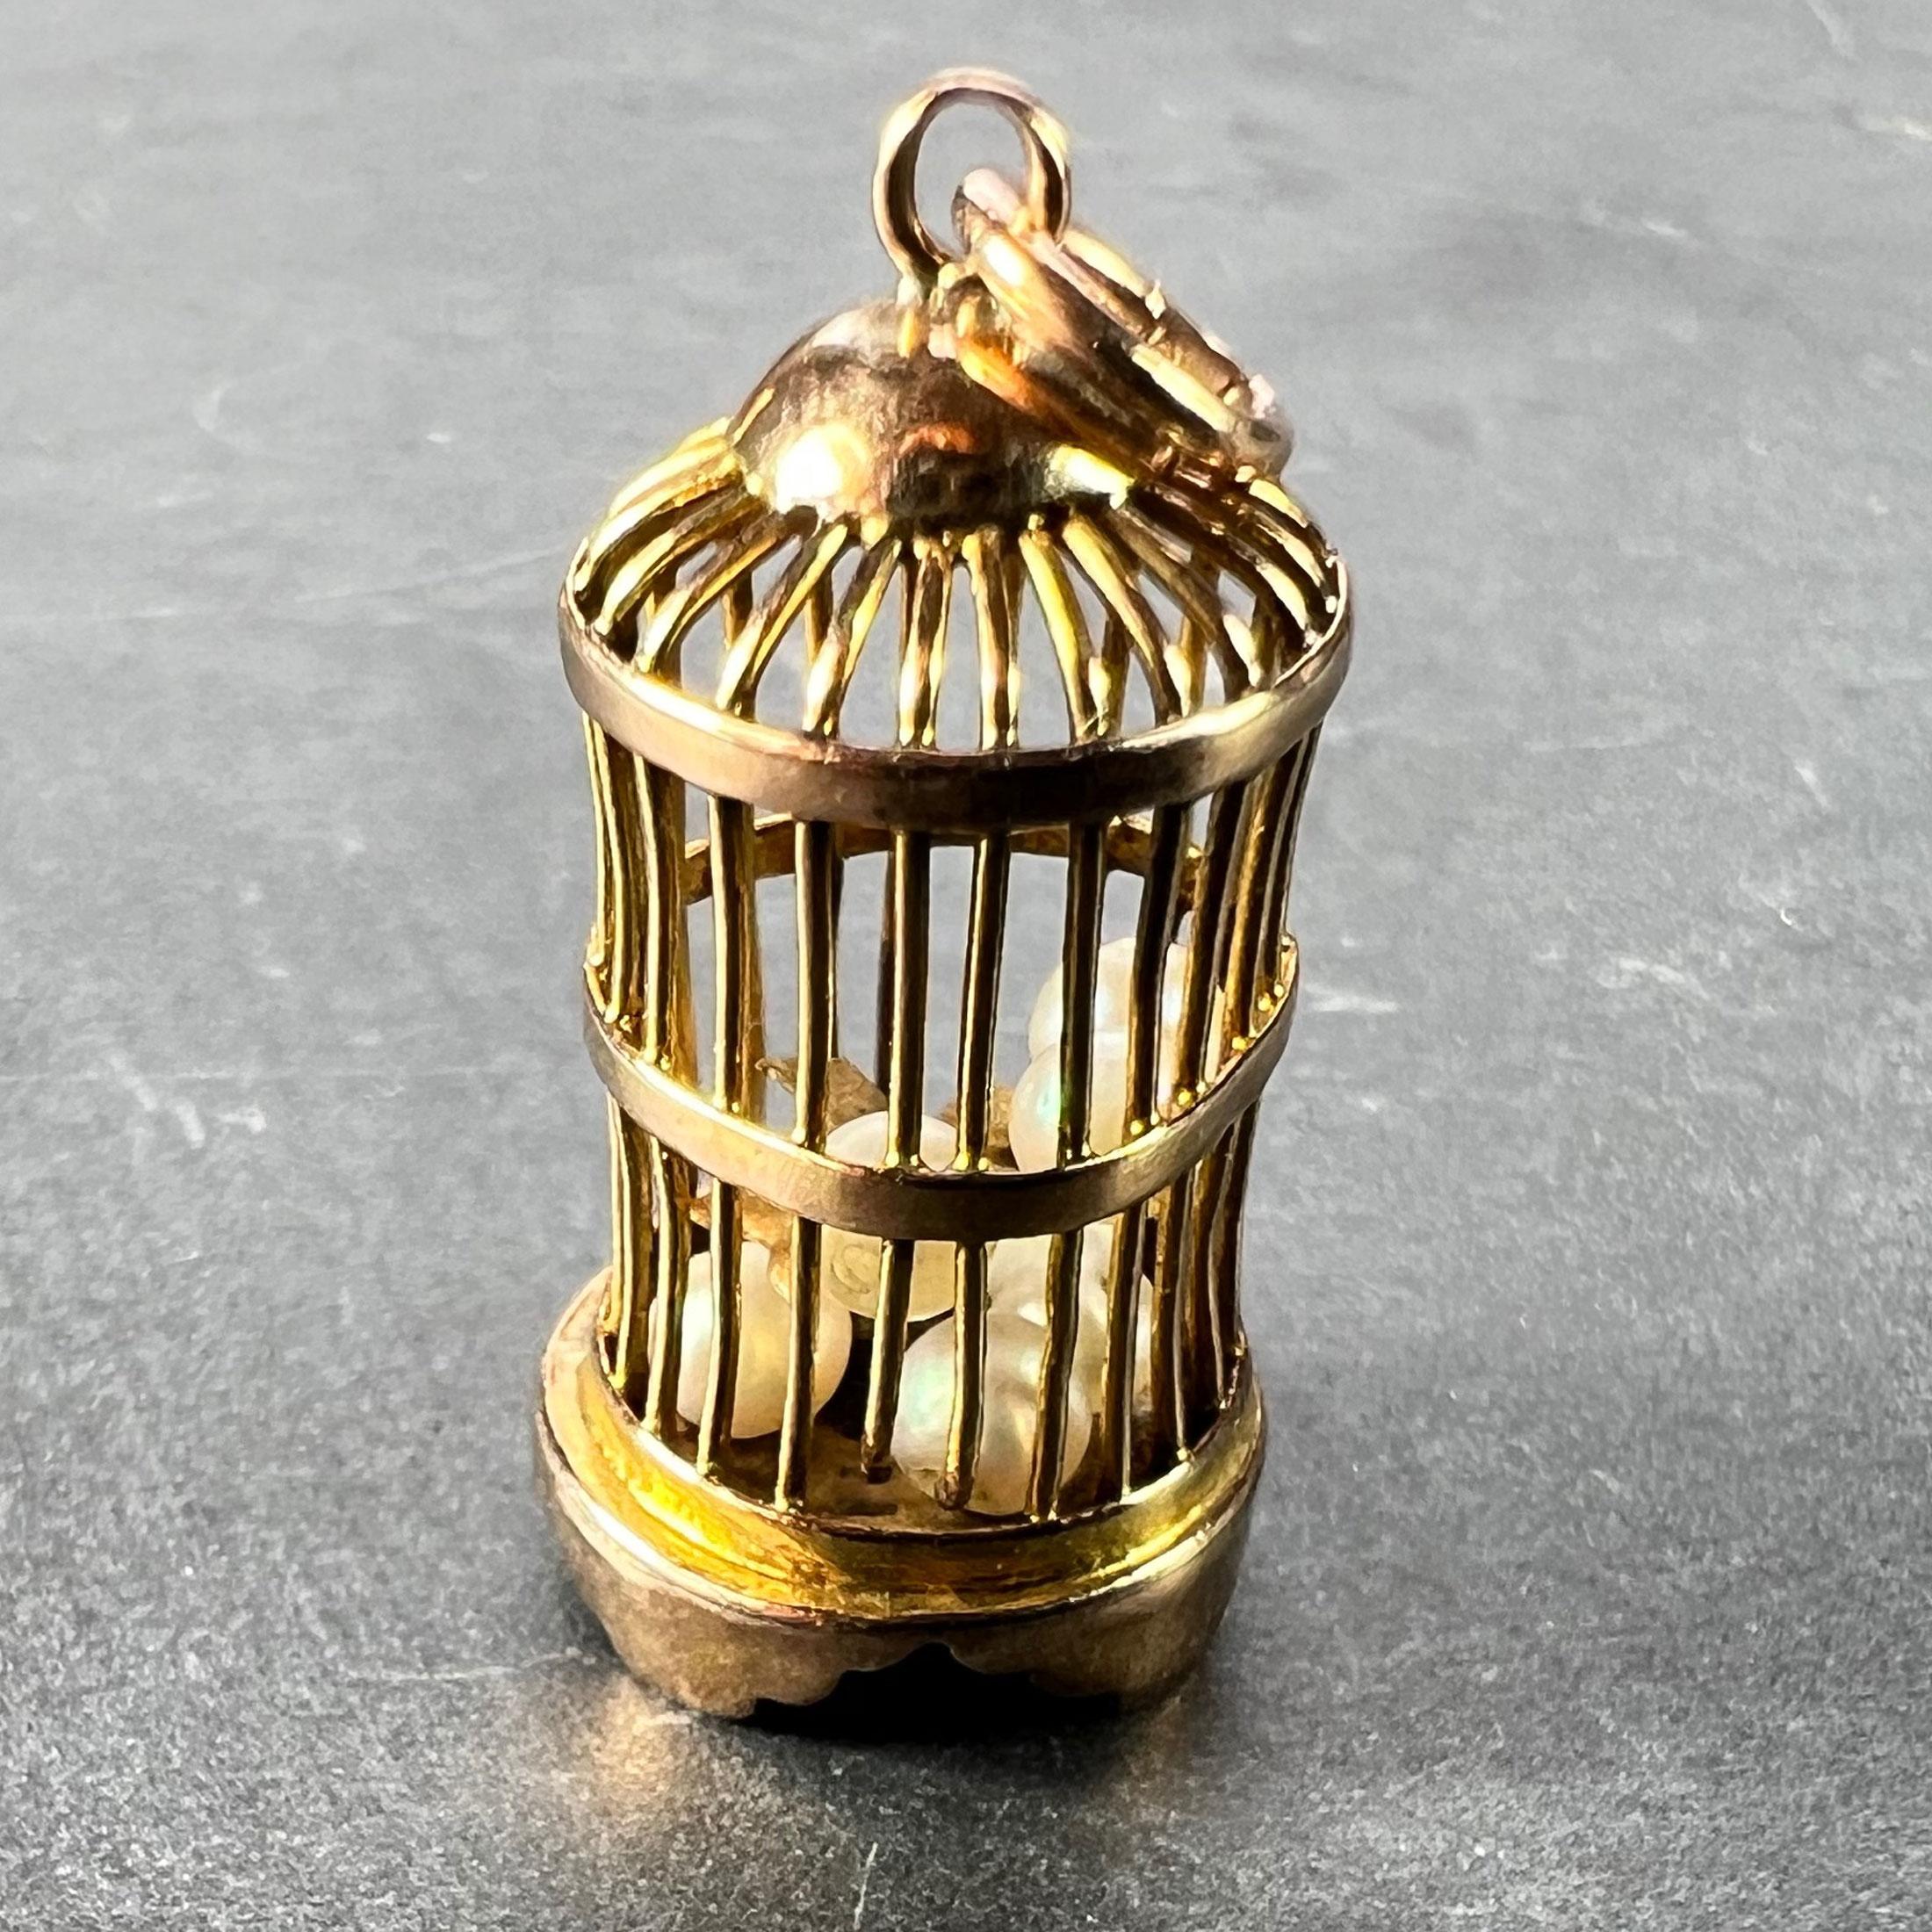 Uncut Bird Cage Cultured Pearls 14 Karat Yellow Gold Charm Pendant For Sale